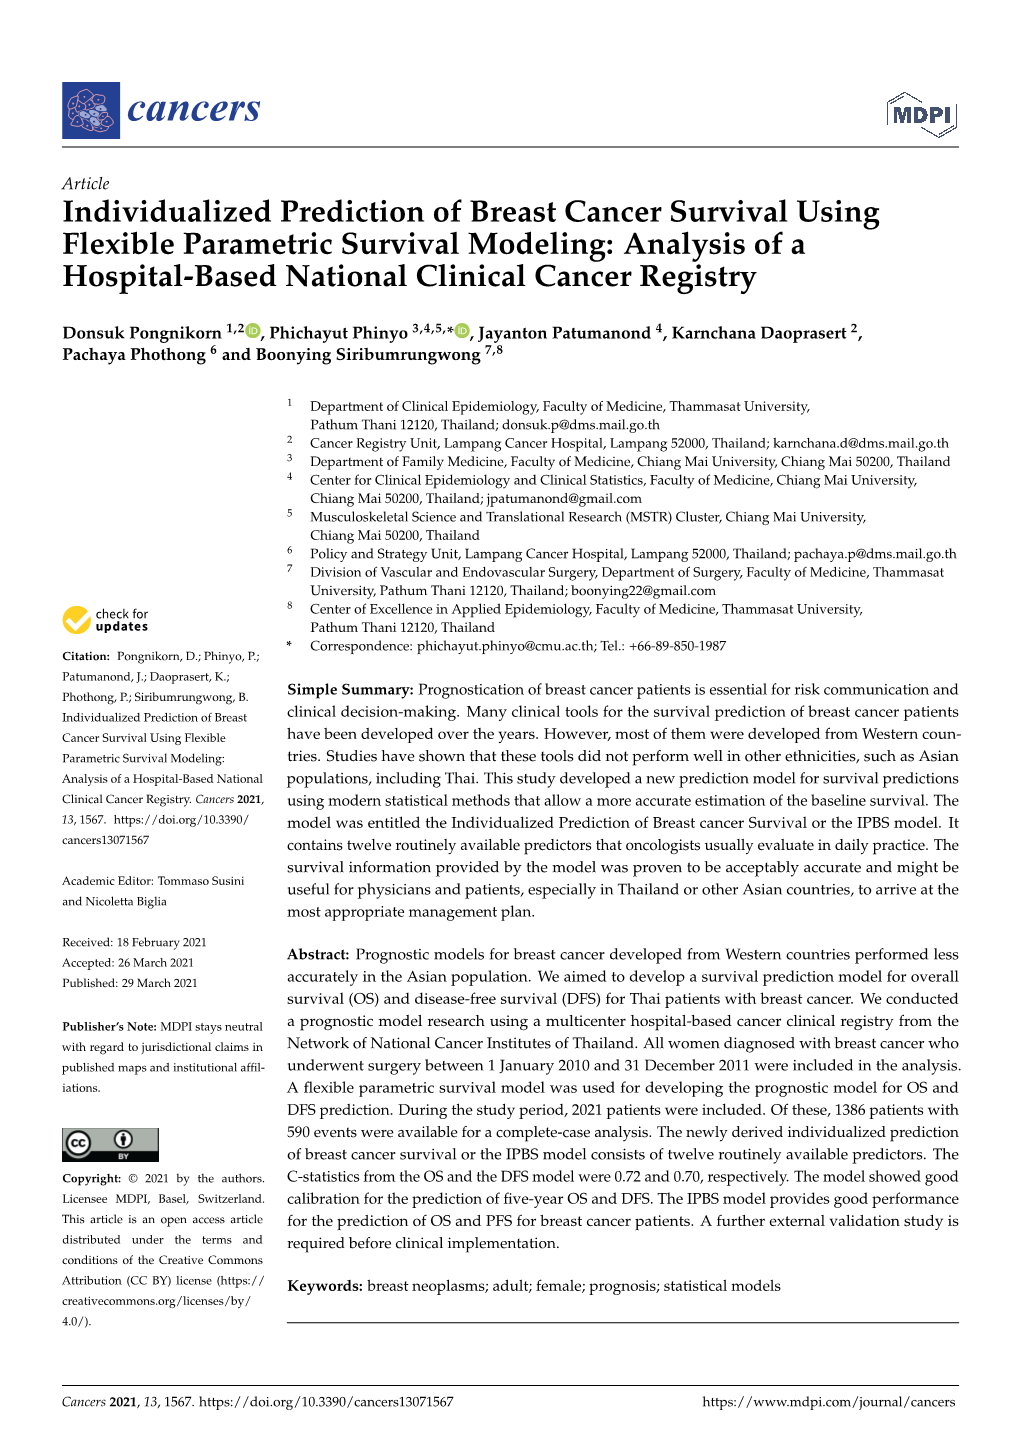 Individualized Prediction of Breast Cancer Survival Using Flexible Parametric Survival Modeling: Analysis of a Hospital-Based National Clinical Cancer Registry